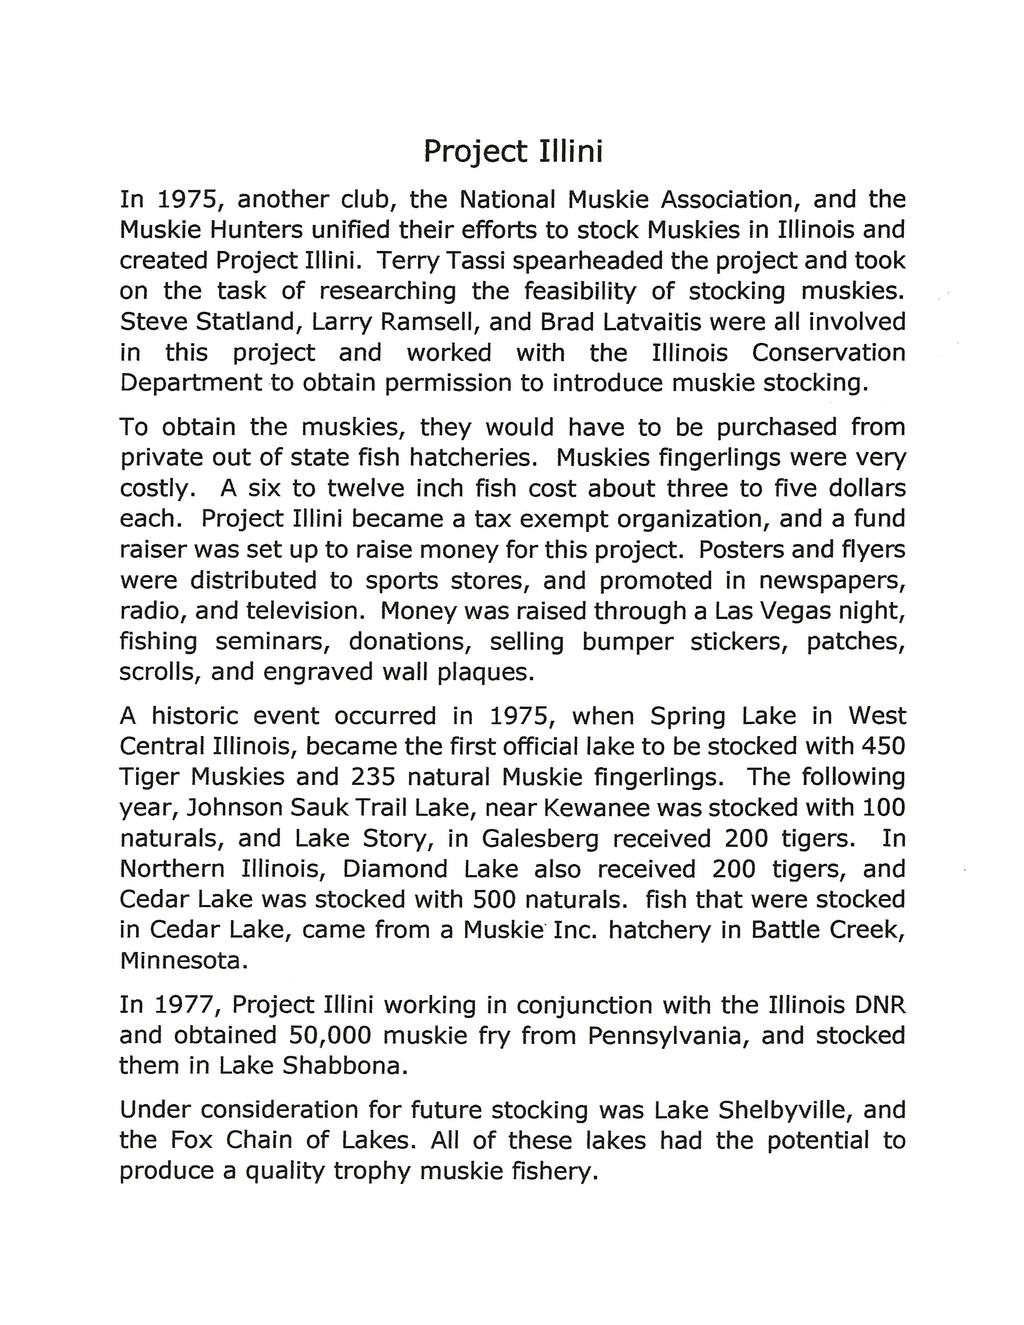 Project Illini In 1975, another club, the National Muskie Association, and the Muskie Hunters unified their efforts to stock Muskies in Illinois and created Project Illini.